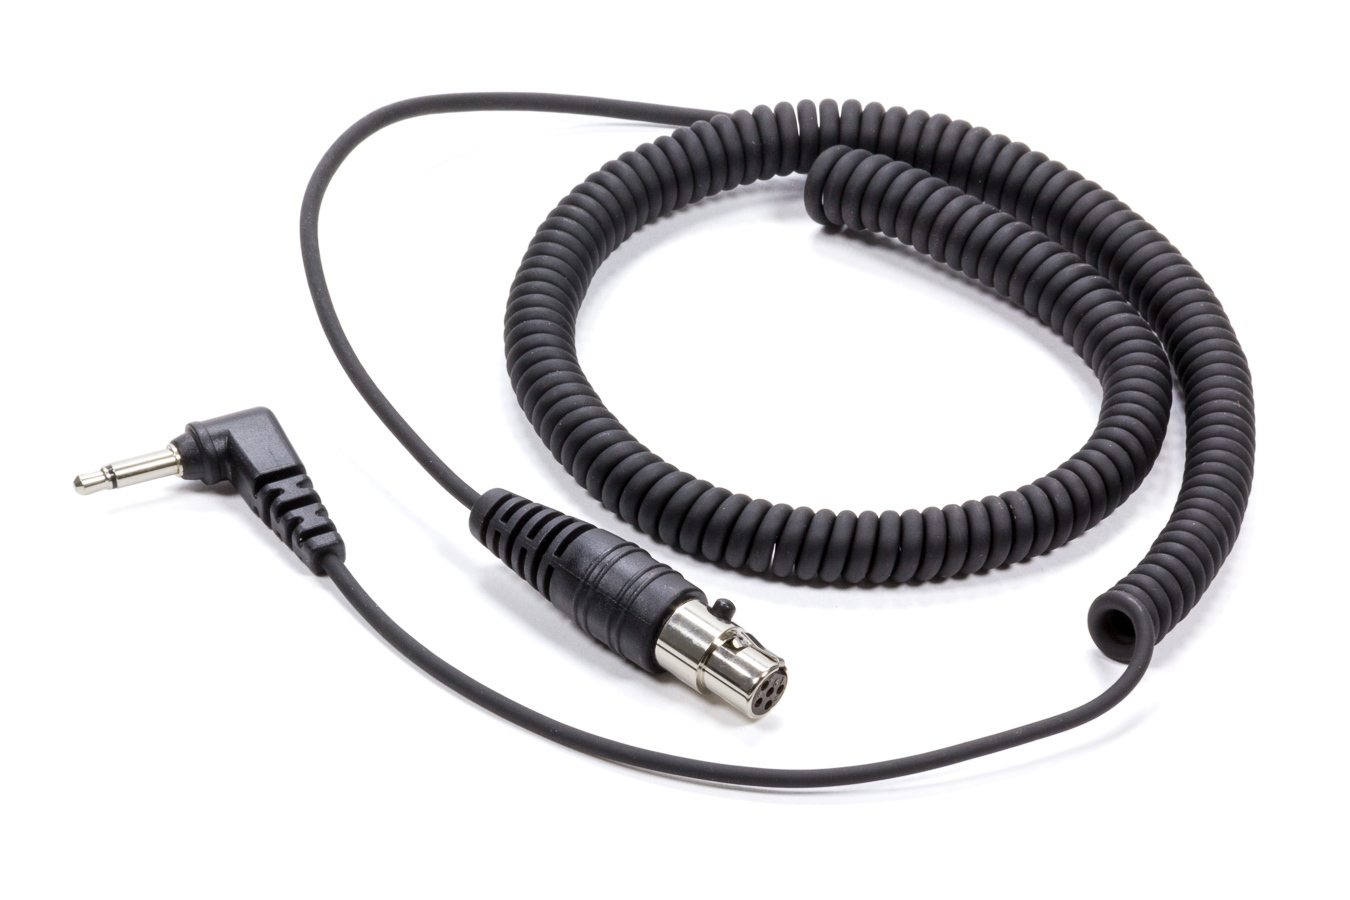 Racing Electronics RE3718-K Headset Cable, Listen Only, 90 Degree, 1/8 in Male to 1/8 in Female Jack, Spiral Cord, Each